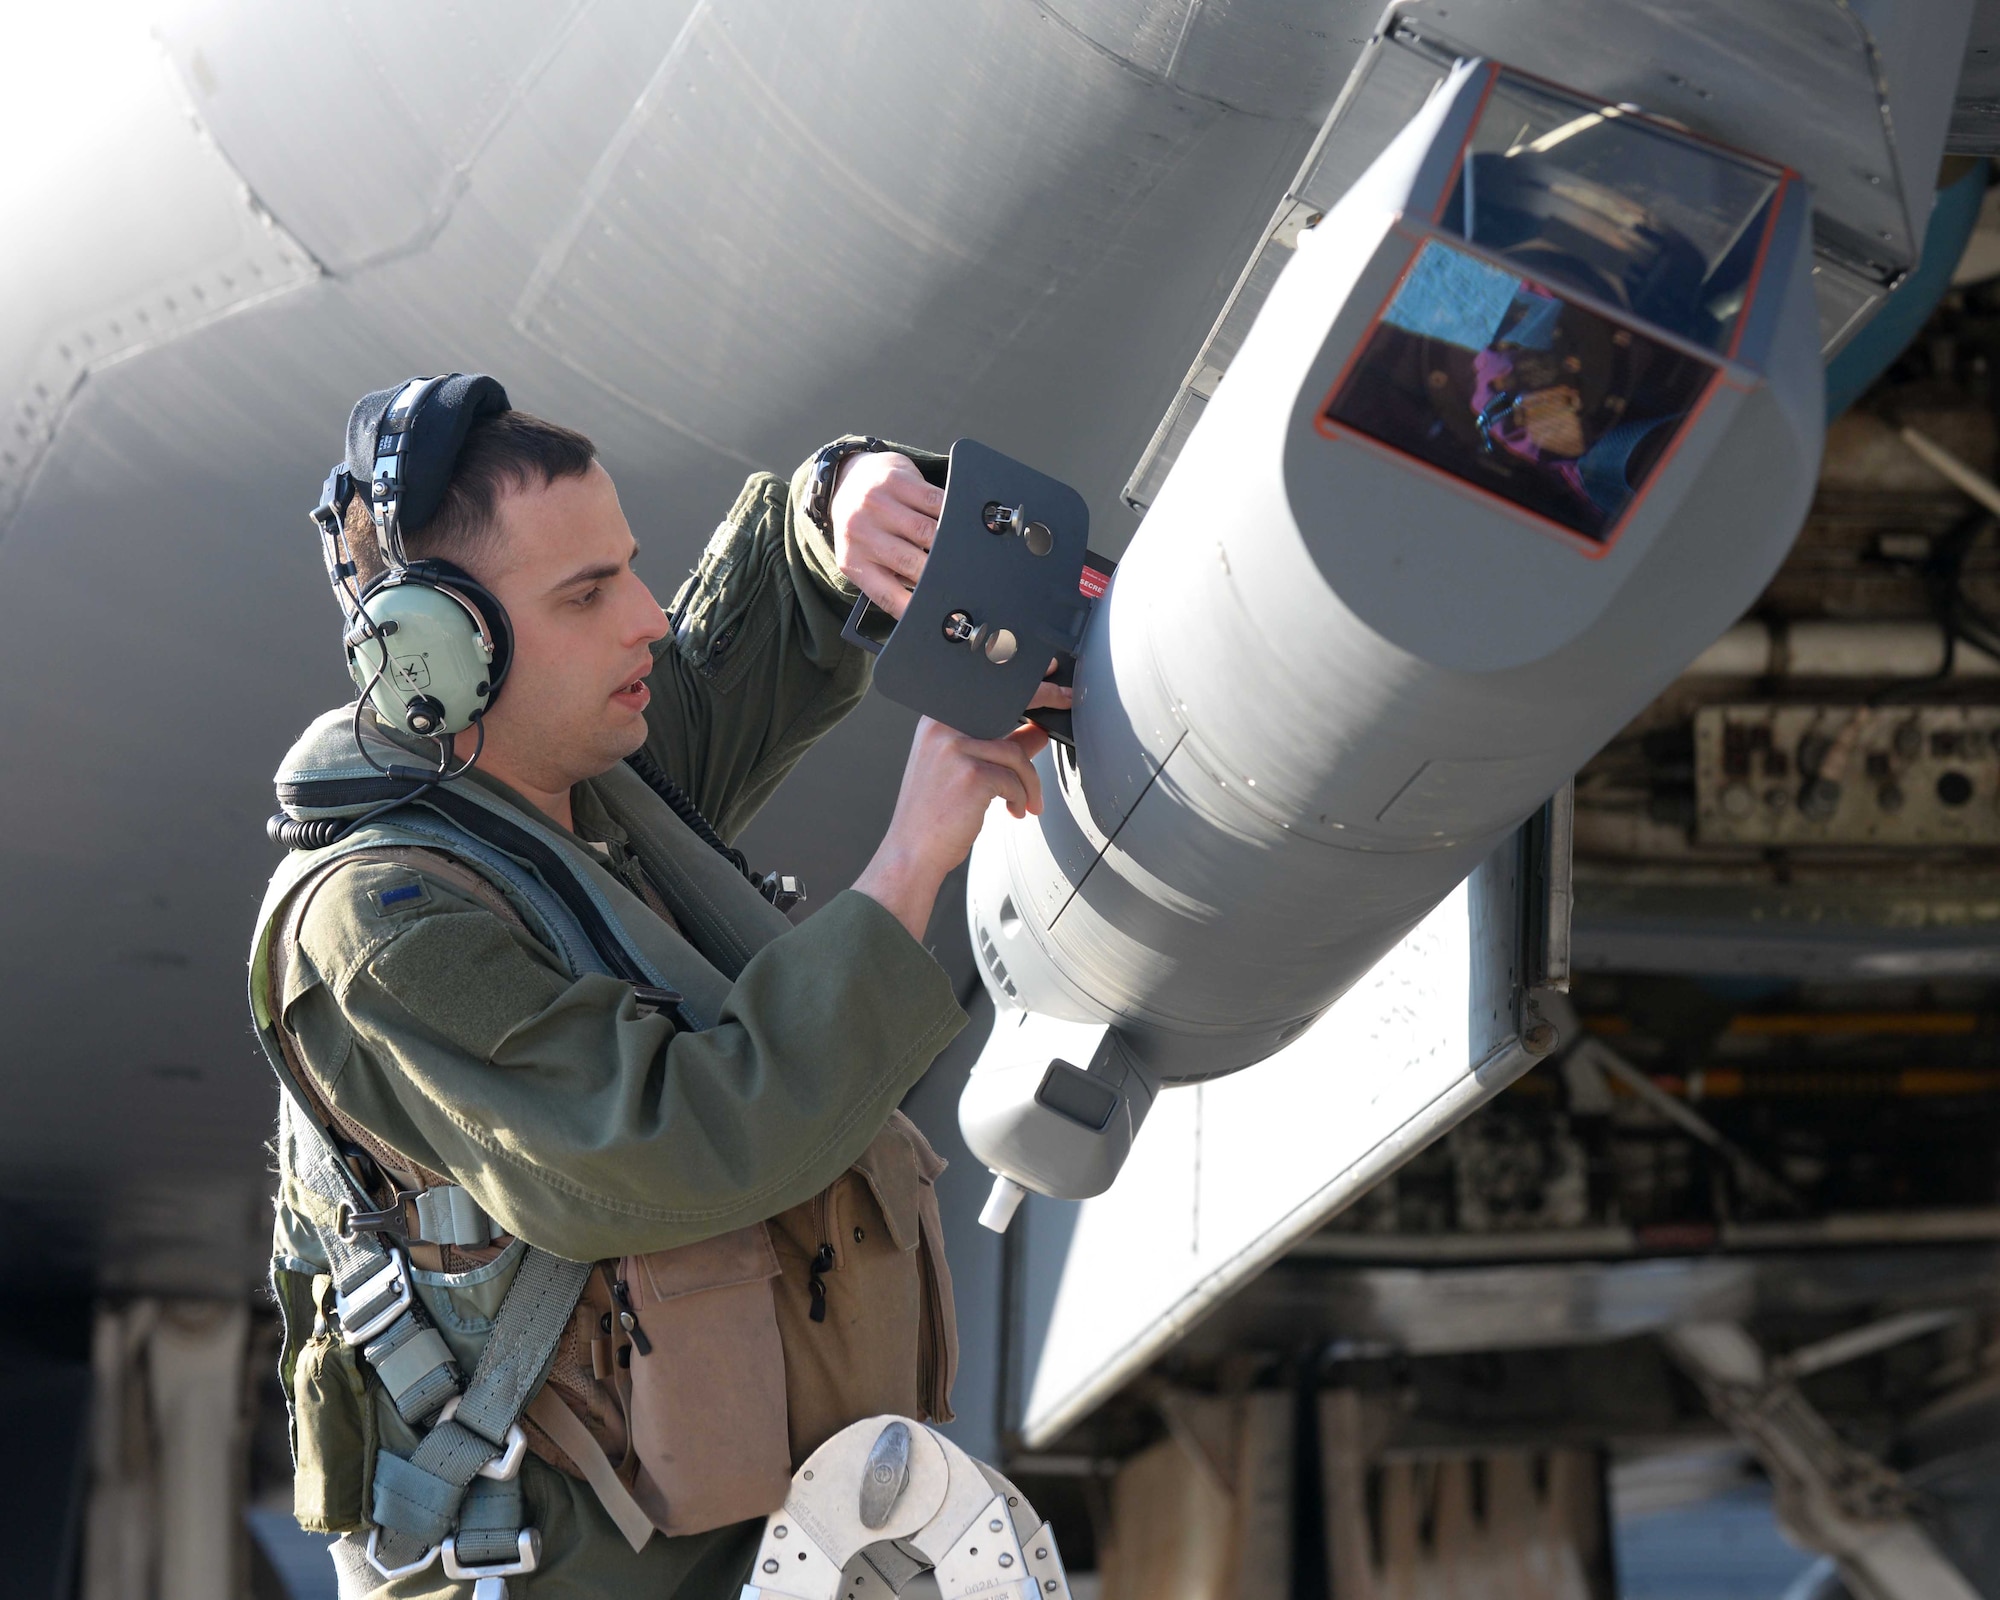 First Lt. Brian Combes, 34th Bomb Squadron B-1 offensive systems officer, loads software into a sniper advanced targeting pod on a B-1B Lancer prior to a Global Power Mission at Ellsworth Air Force Base, S.D., May 12, 2014. The long-range targeting system provides aircrews with positive target identification, autonomous tracking coordinate generation and precise weapons guidance from extended standoff ranges supporting air to ground operations.(U.S. Air Force photo by Airman 1st Class Rebecca Imwalle/Released)